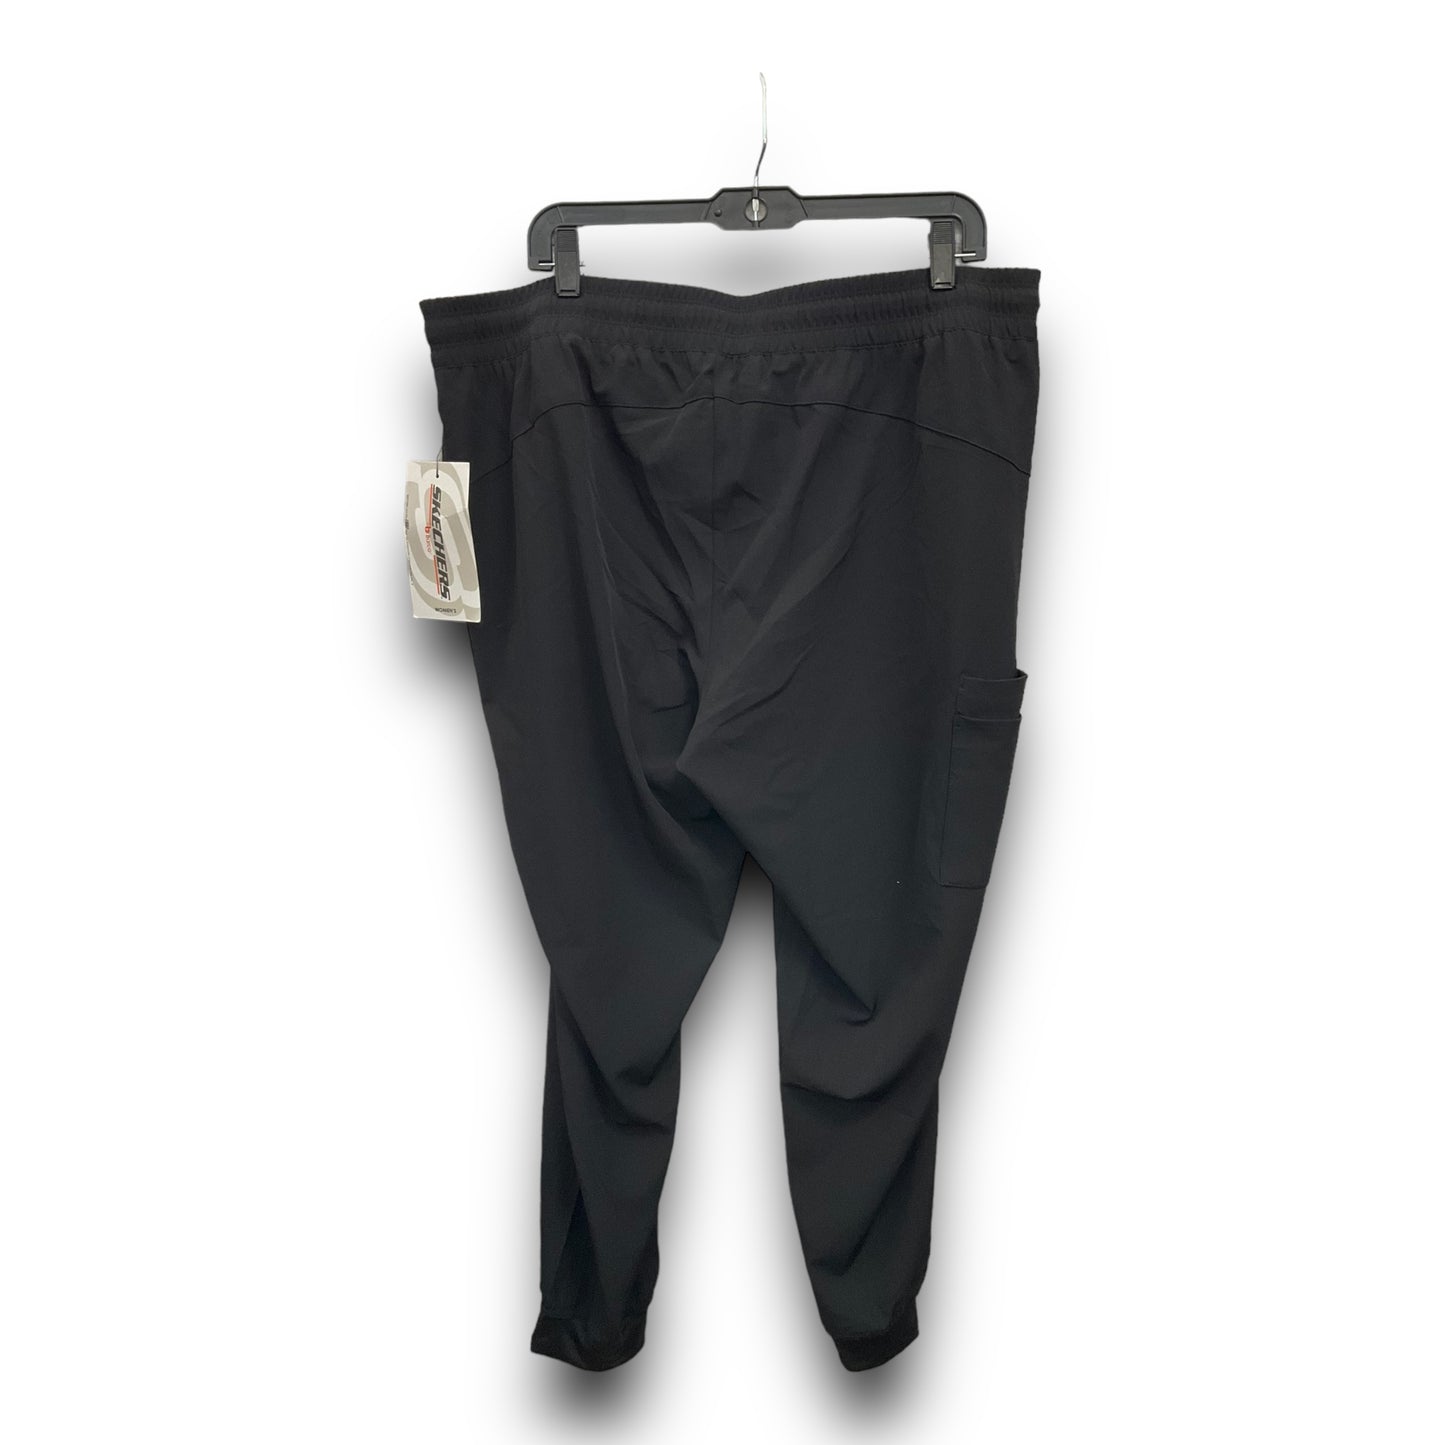 Athletic Pants By Skechers  Size: 2x